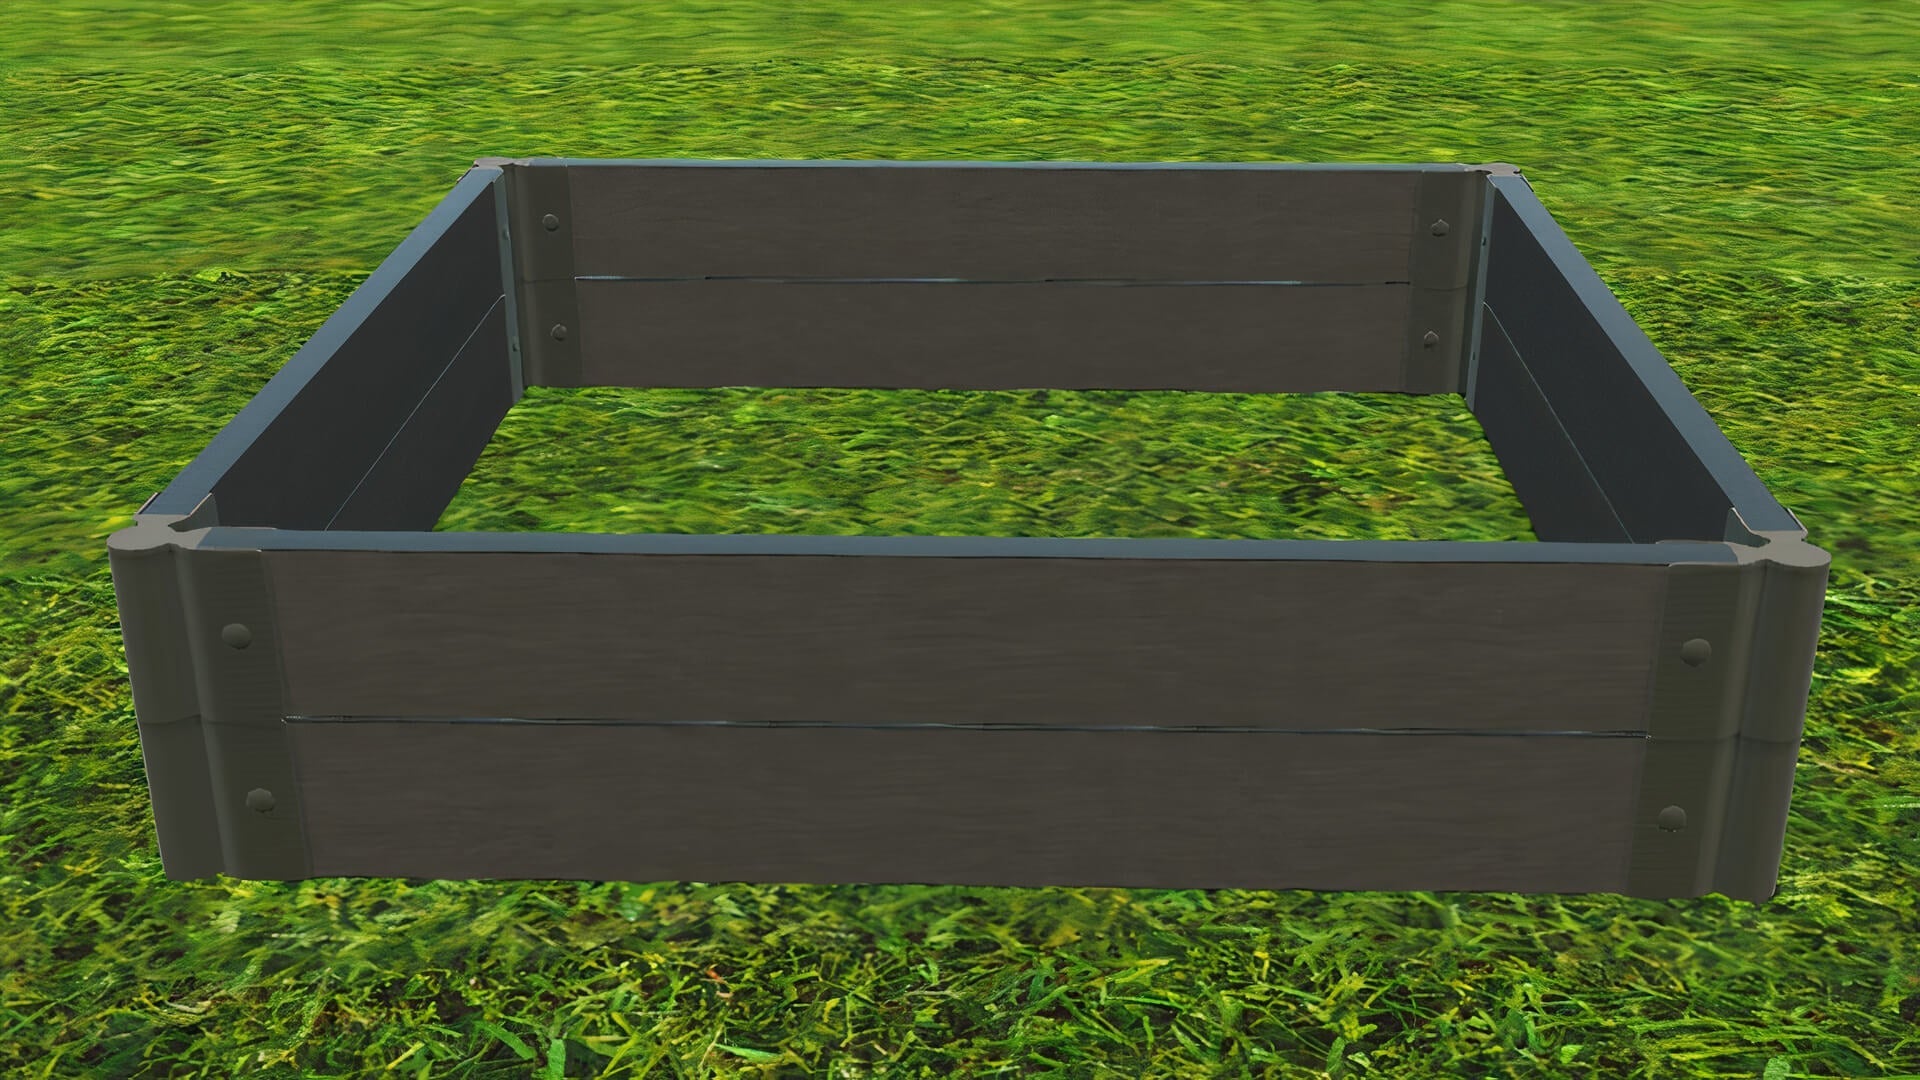 4' x 4' Raised Garden Bed Raised Garden Beds Frame It All Weathered Wood 2" 2 = 11"